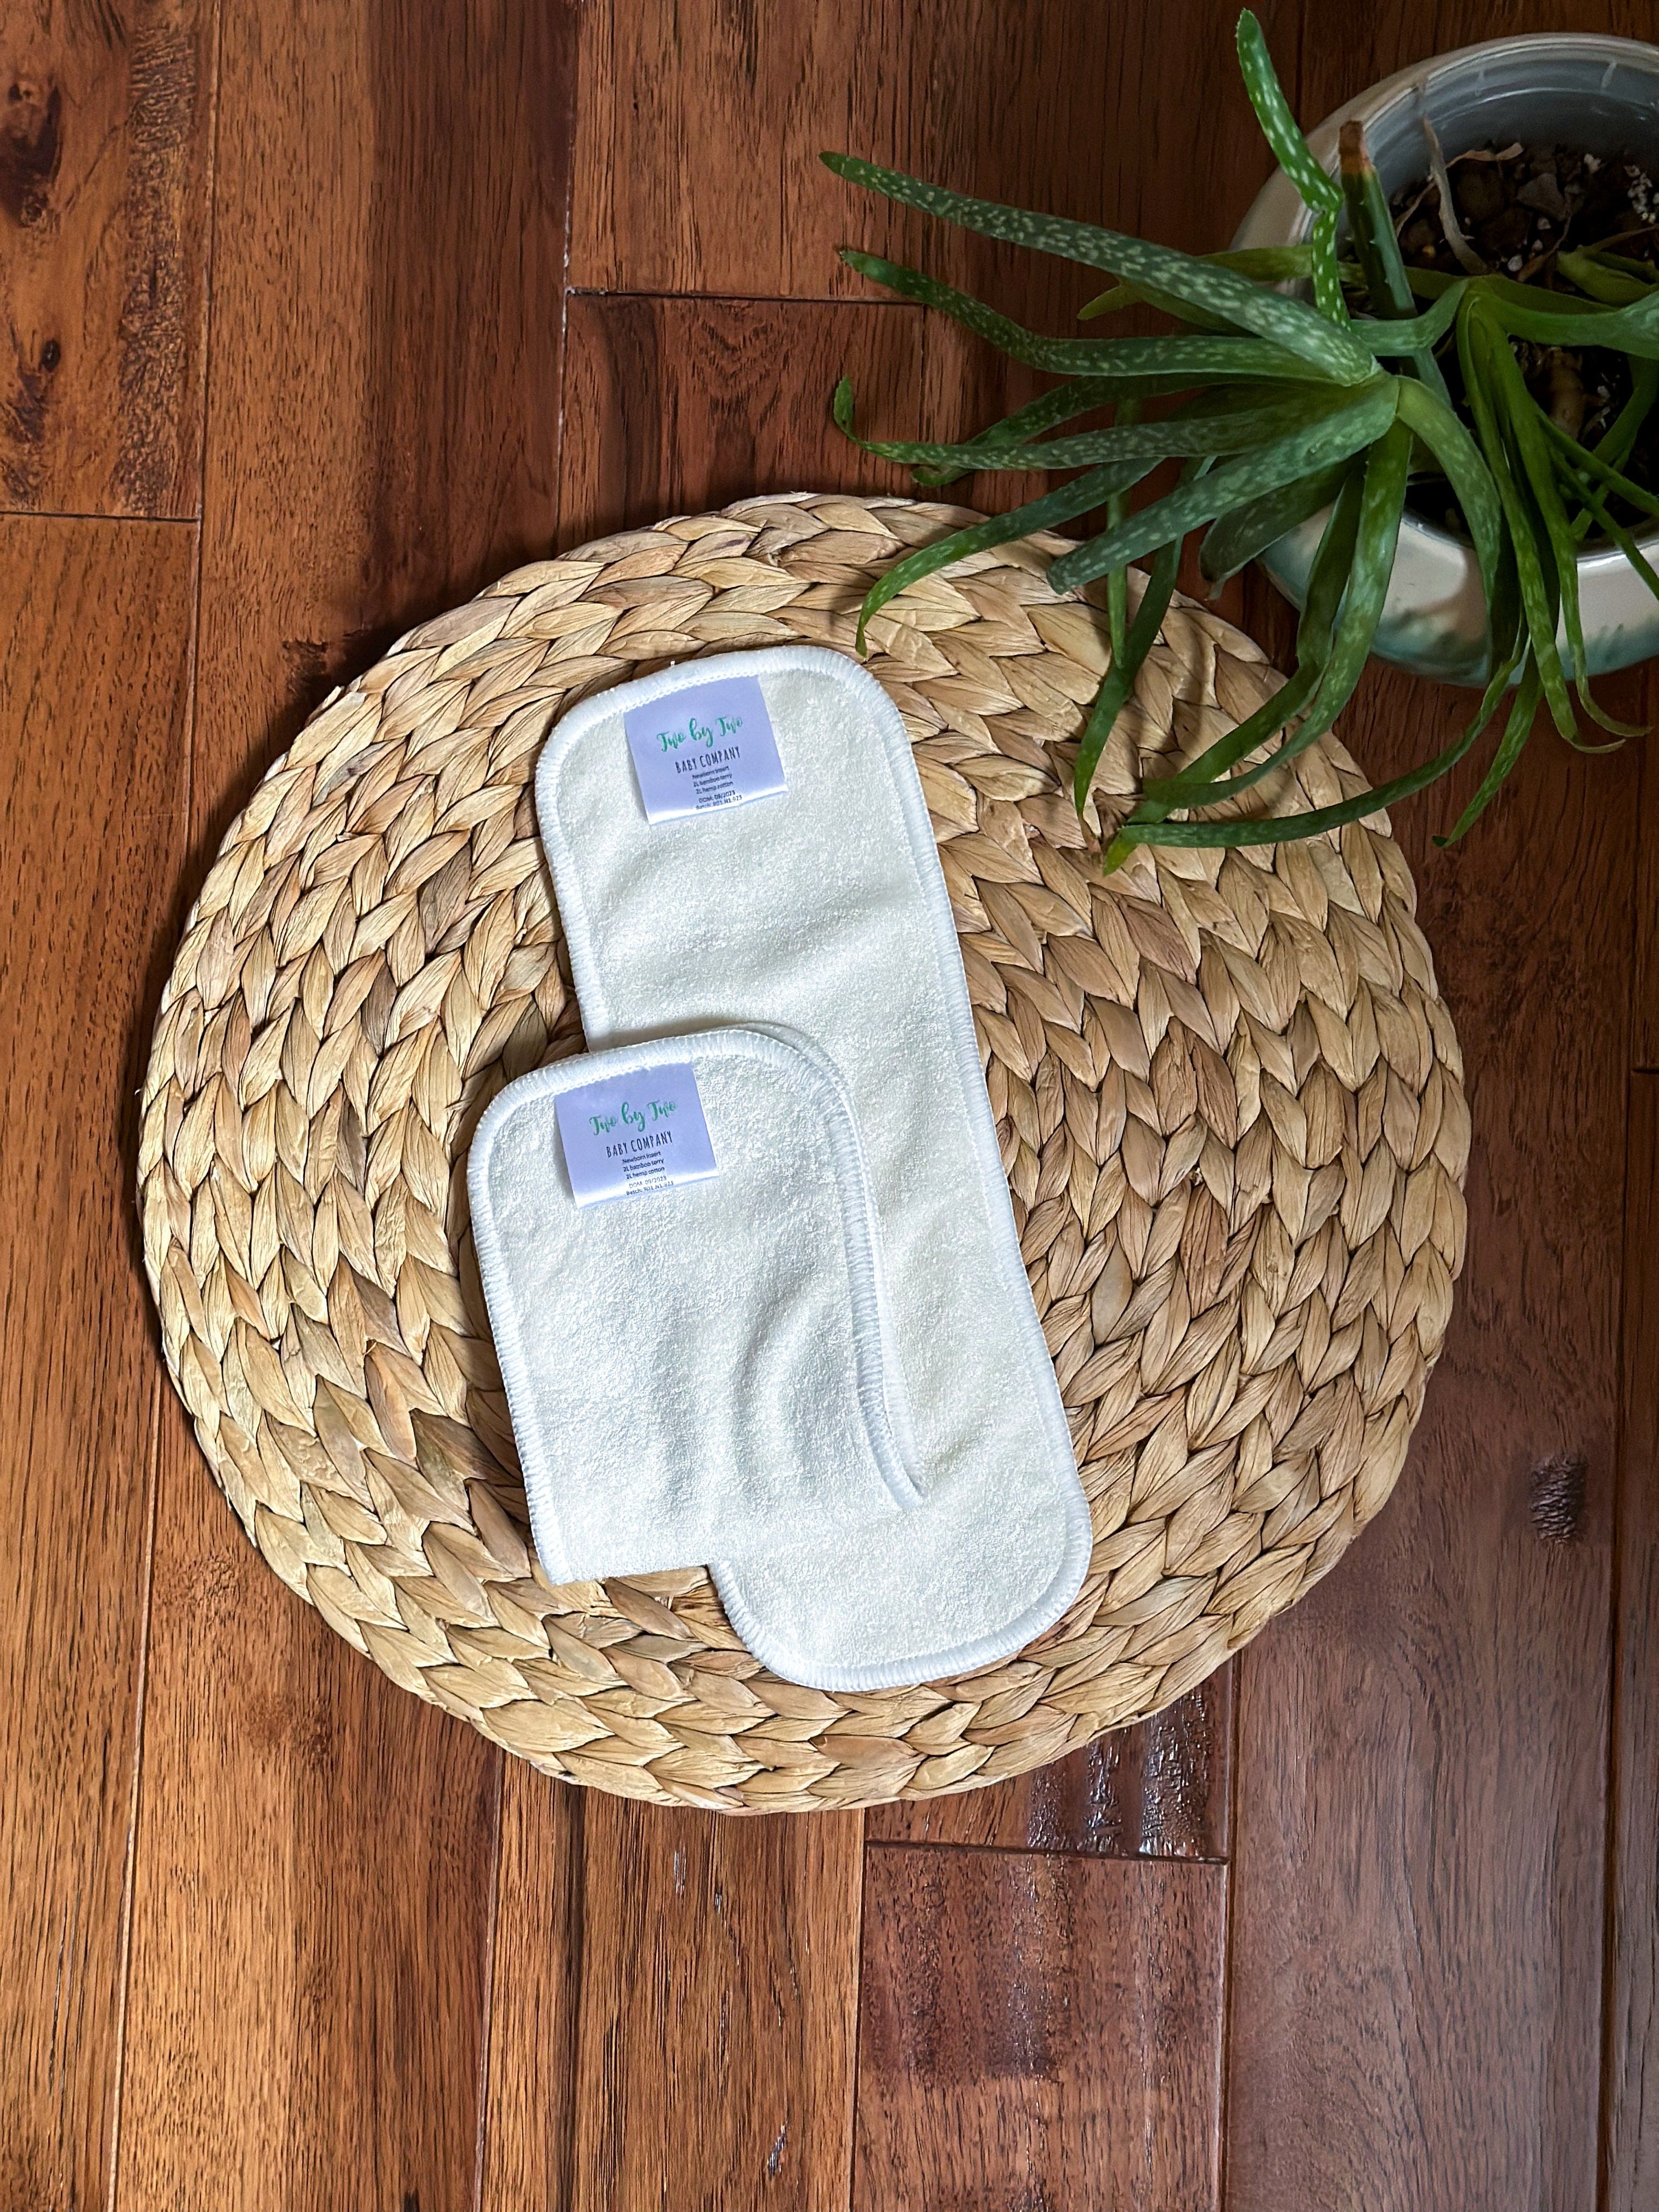 Two by Two Baby Company Newborn Natural Fiber Insert